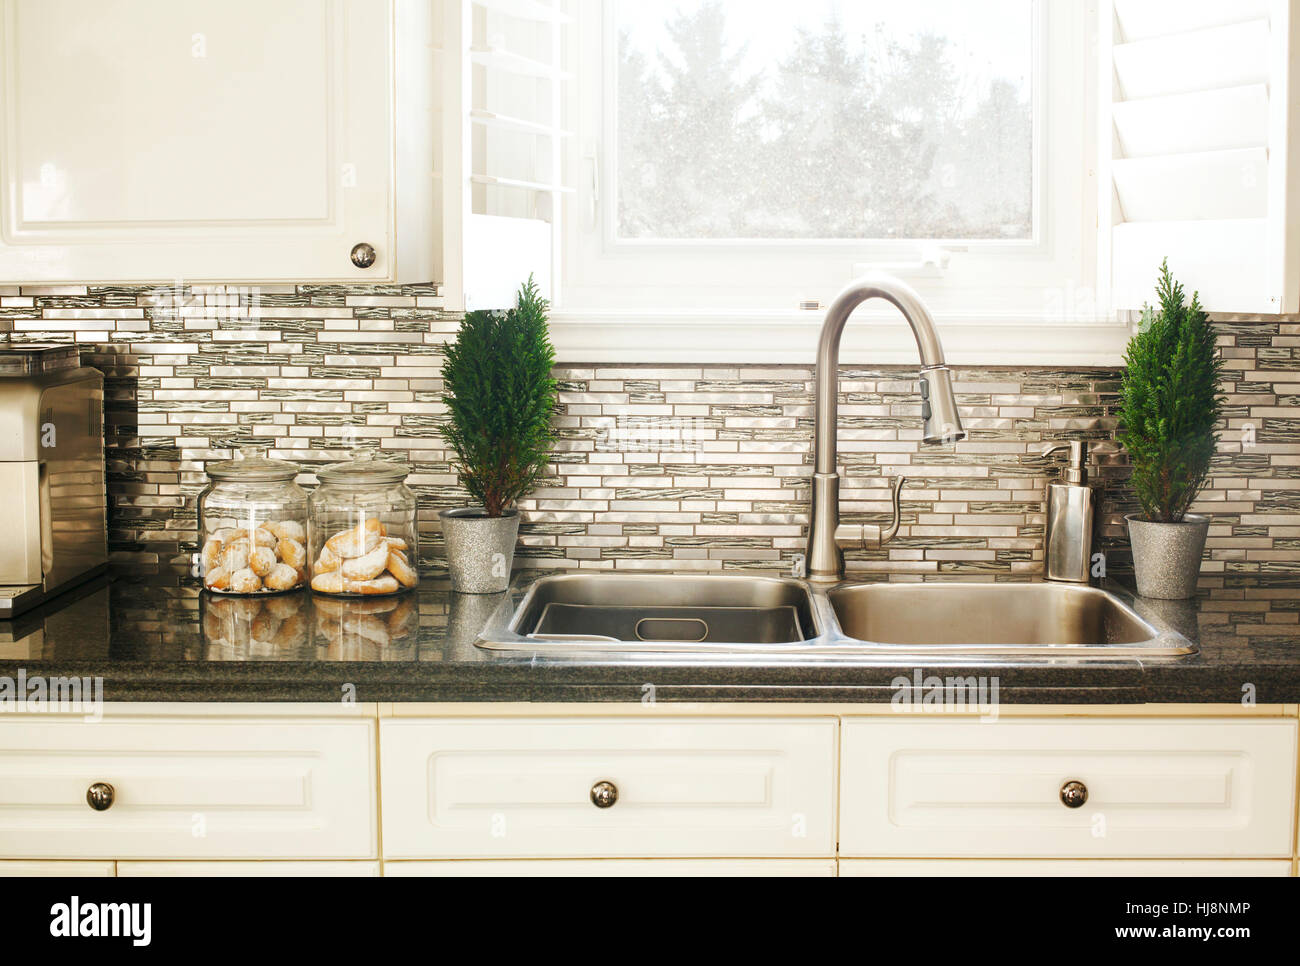 Countertop and sink in modern kitchen Stock Photo